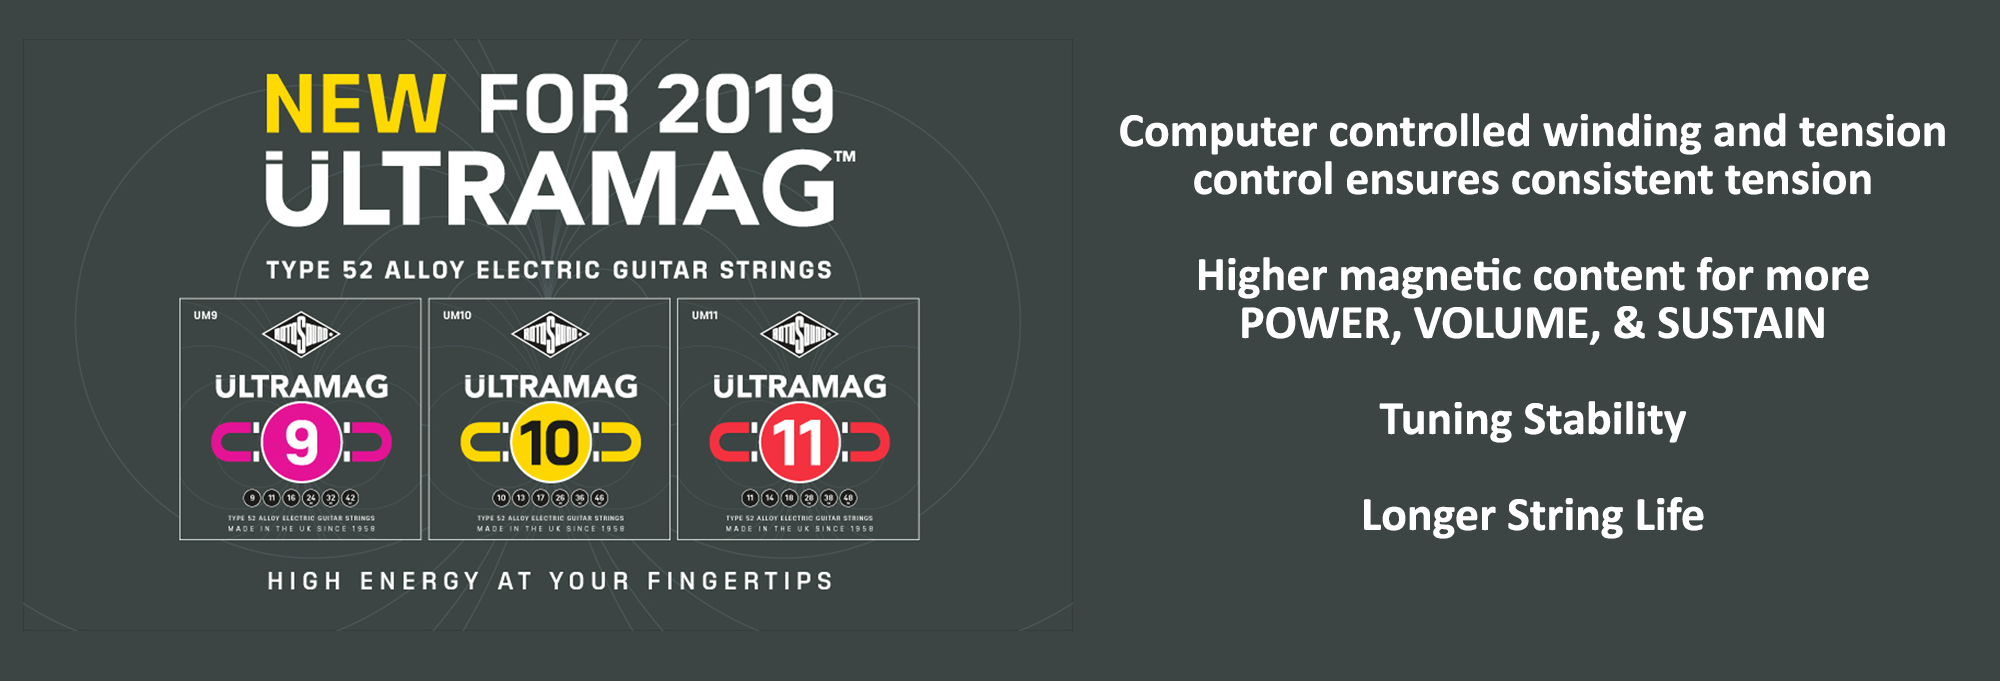 NEW FOR 2019! Rotosound Ultramag Electric Strings